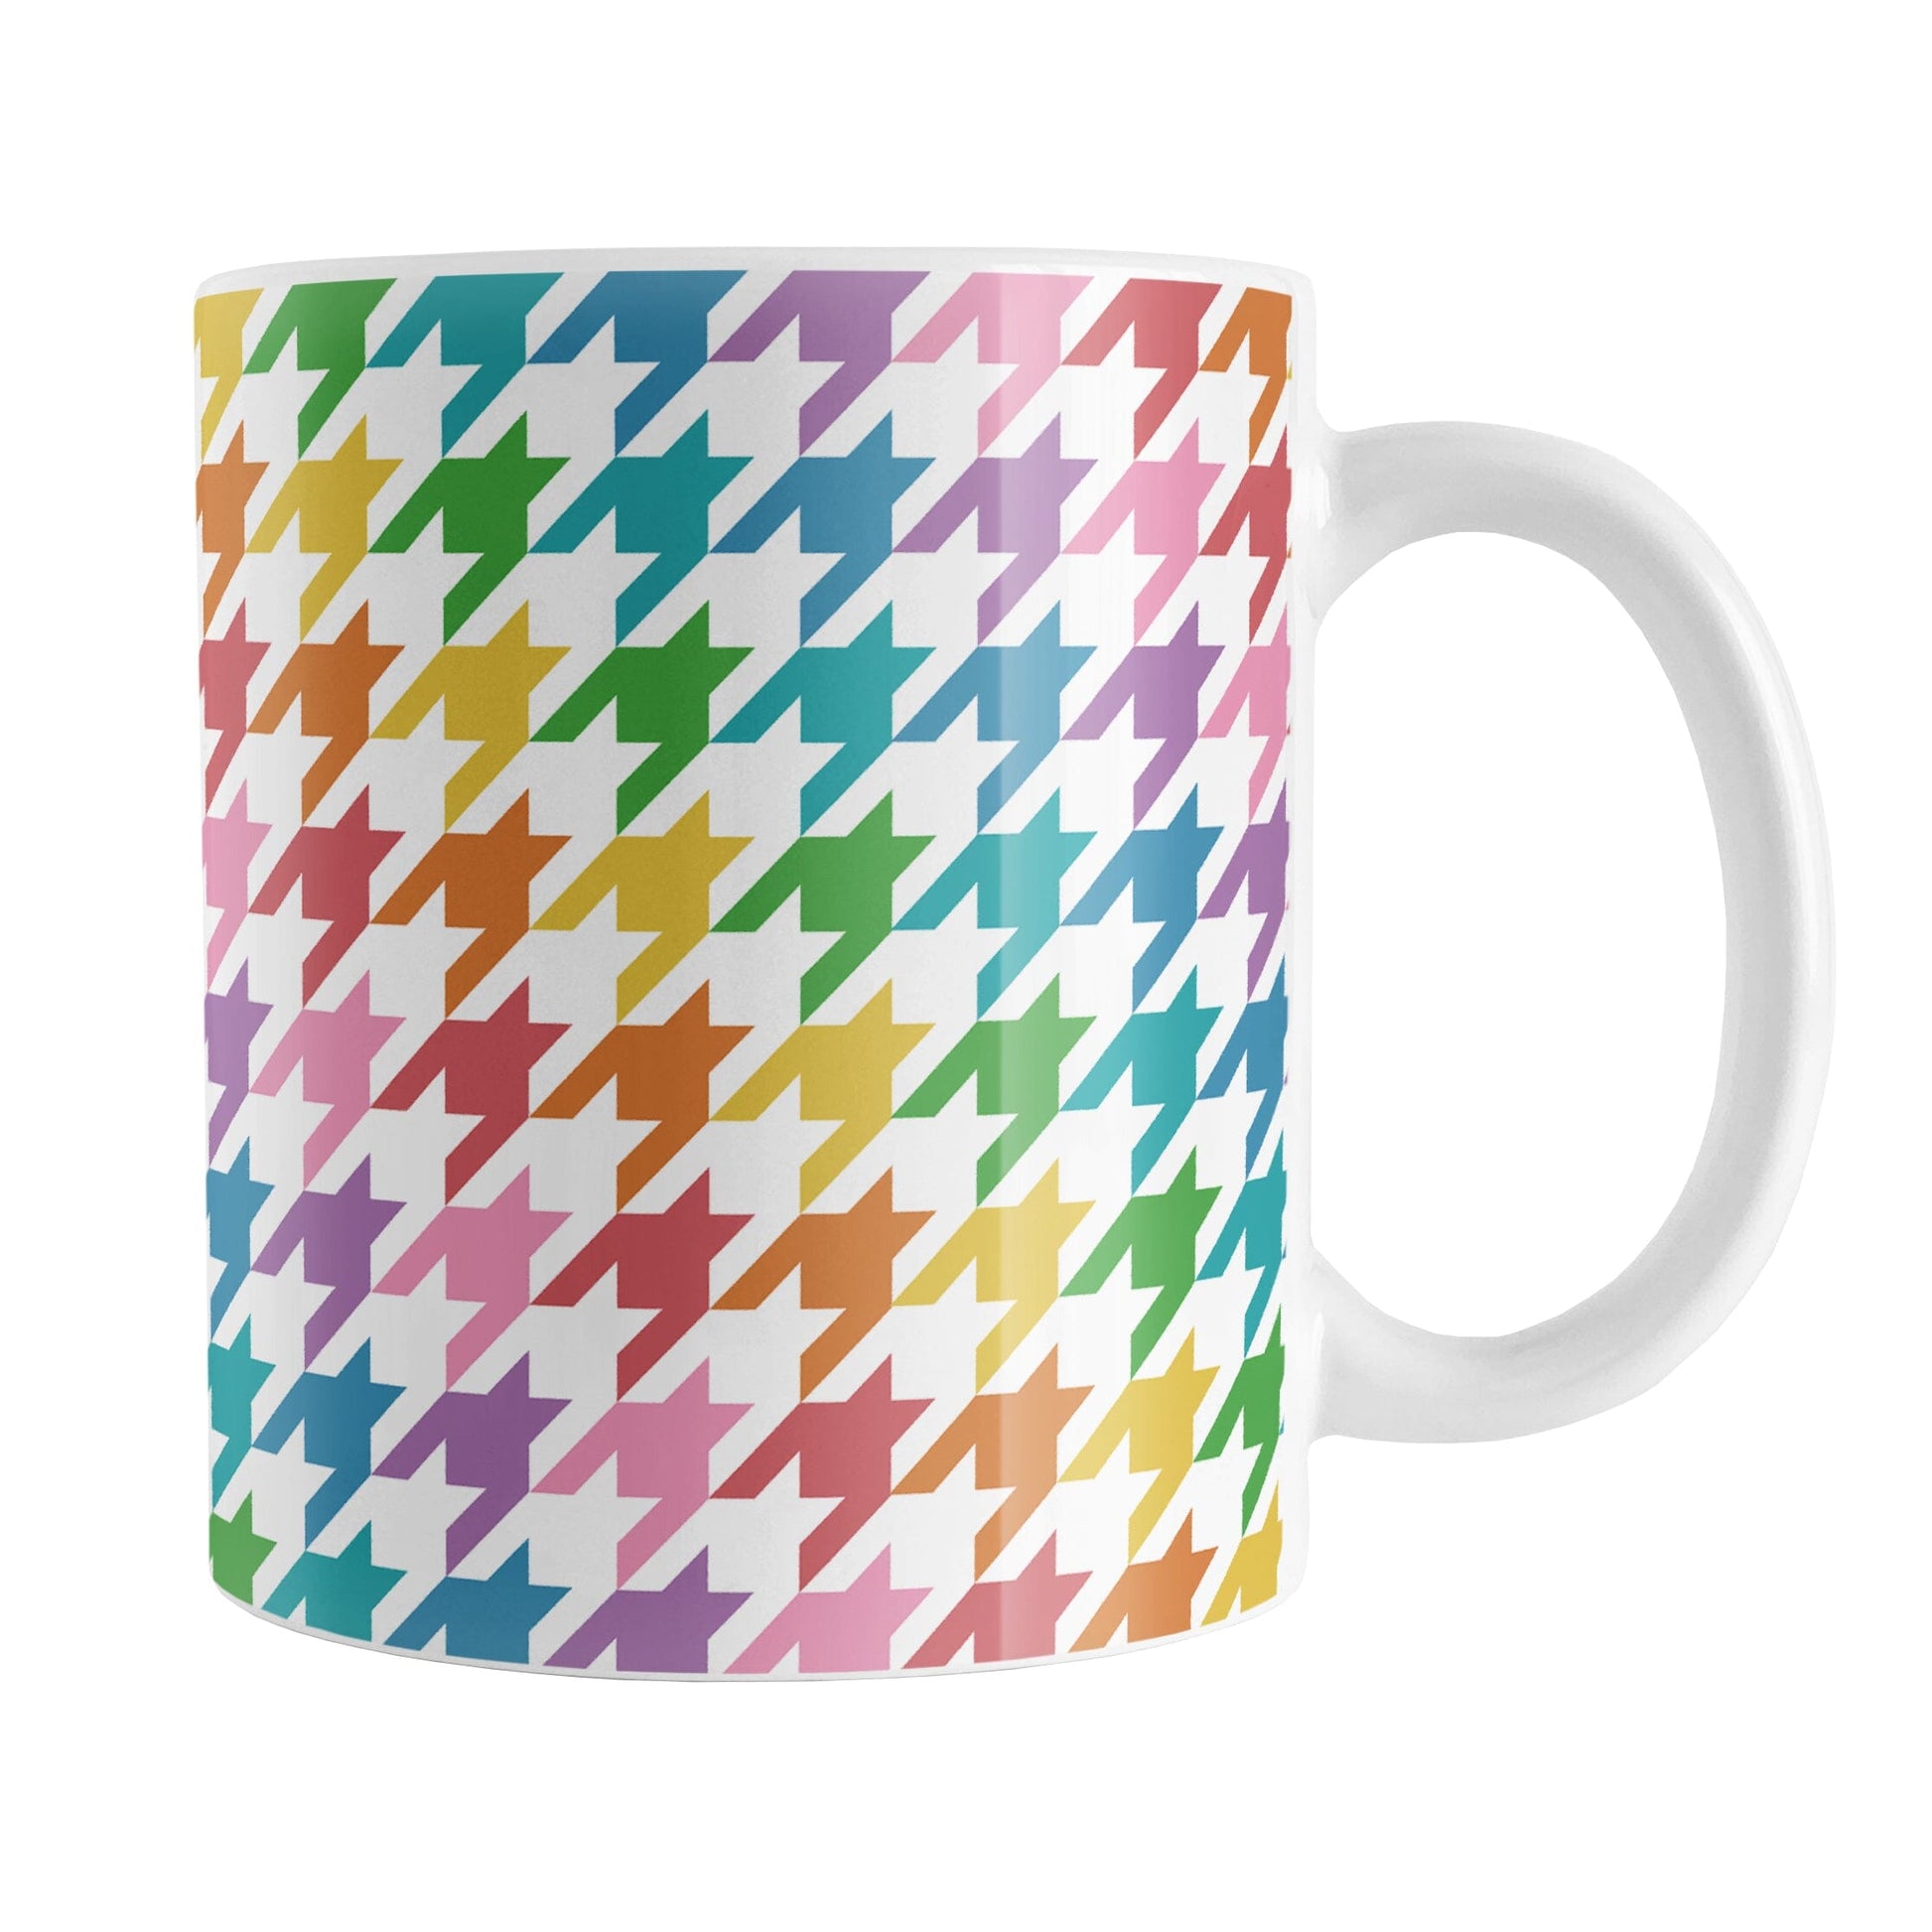 Rainbow Houndstooth Mug (11oz) at Amy's Coffee Mugs. A ceramic coffee mug designed with a houndstooth or dogtooth pattern in a rainbow progression of colors that wraps around the mug to the handle.